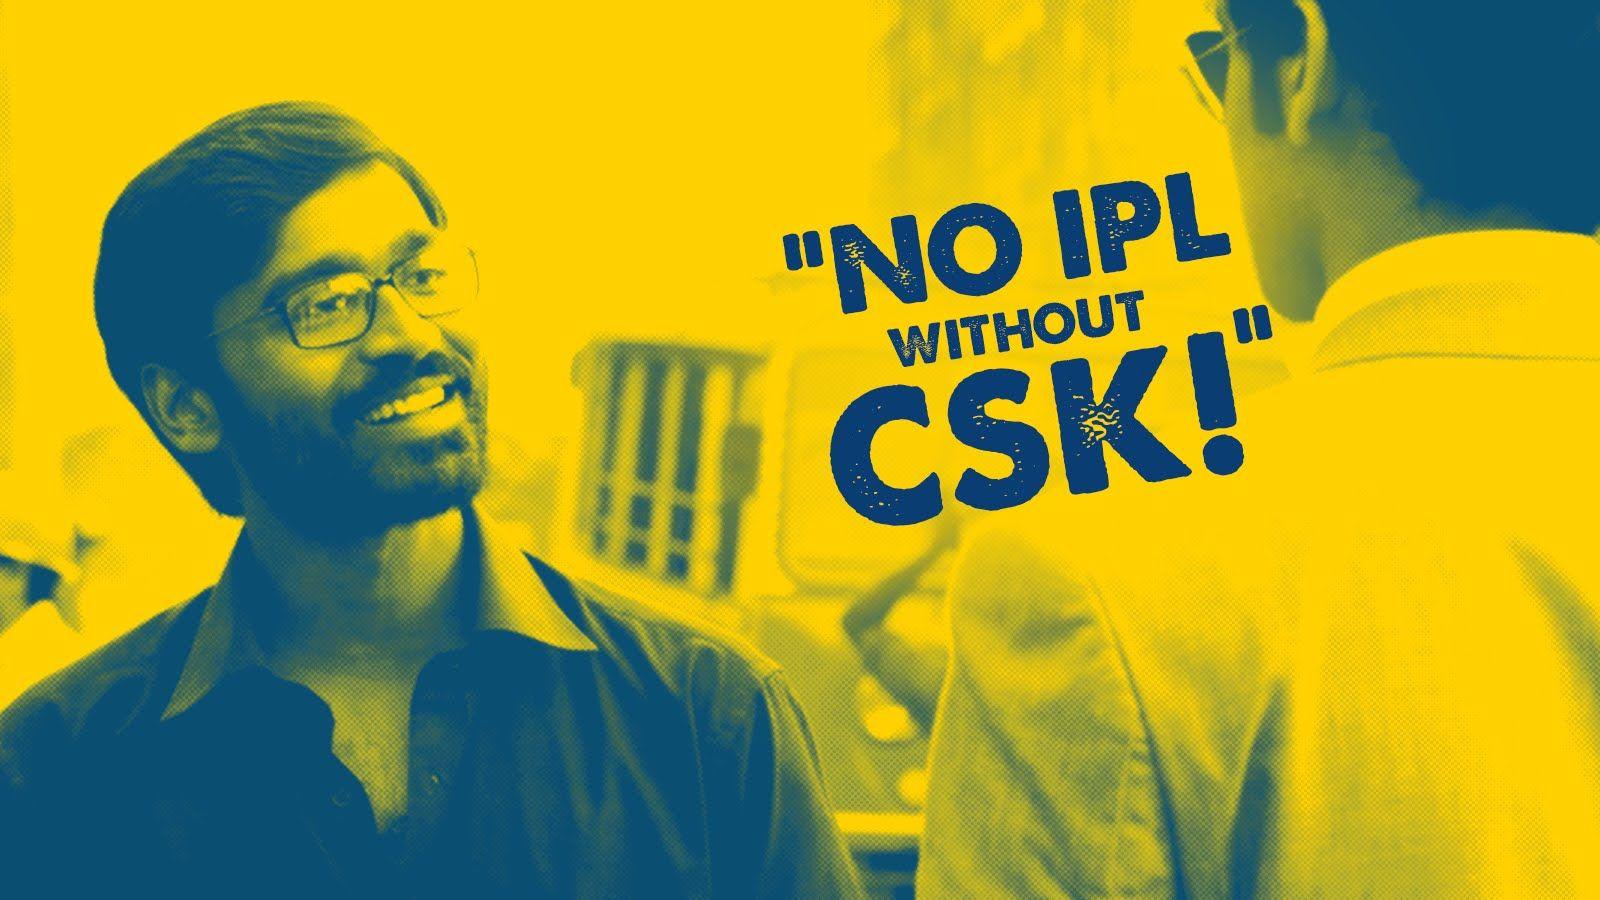 Dhanush angry about IPL without CSK